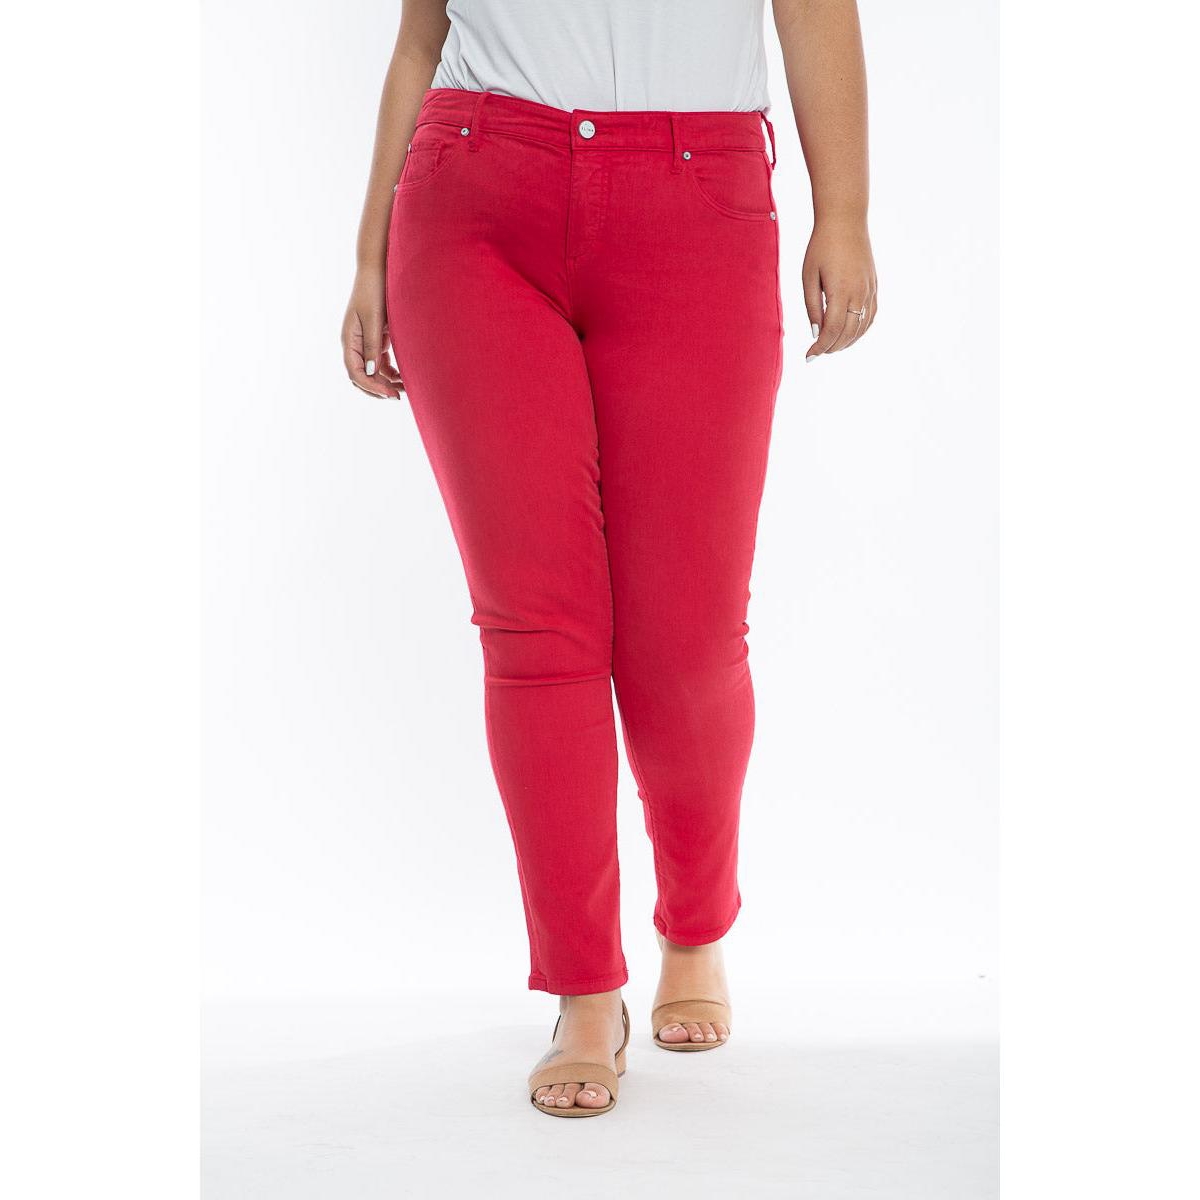 Plus Size Color Mid Rise Slim pants - Rose red